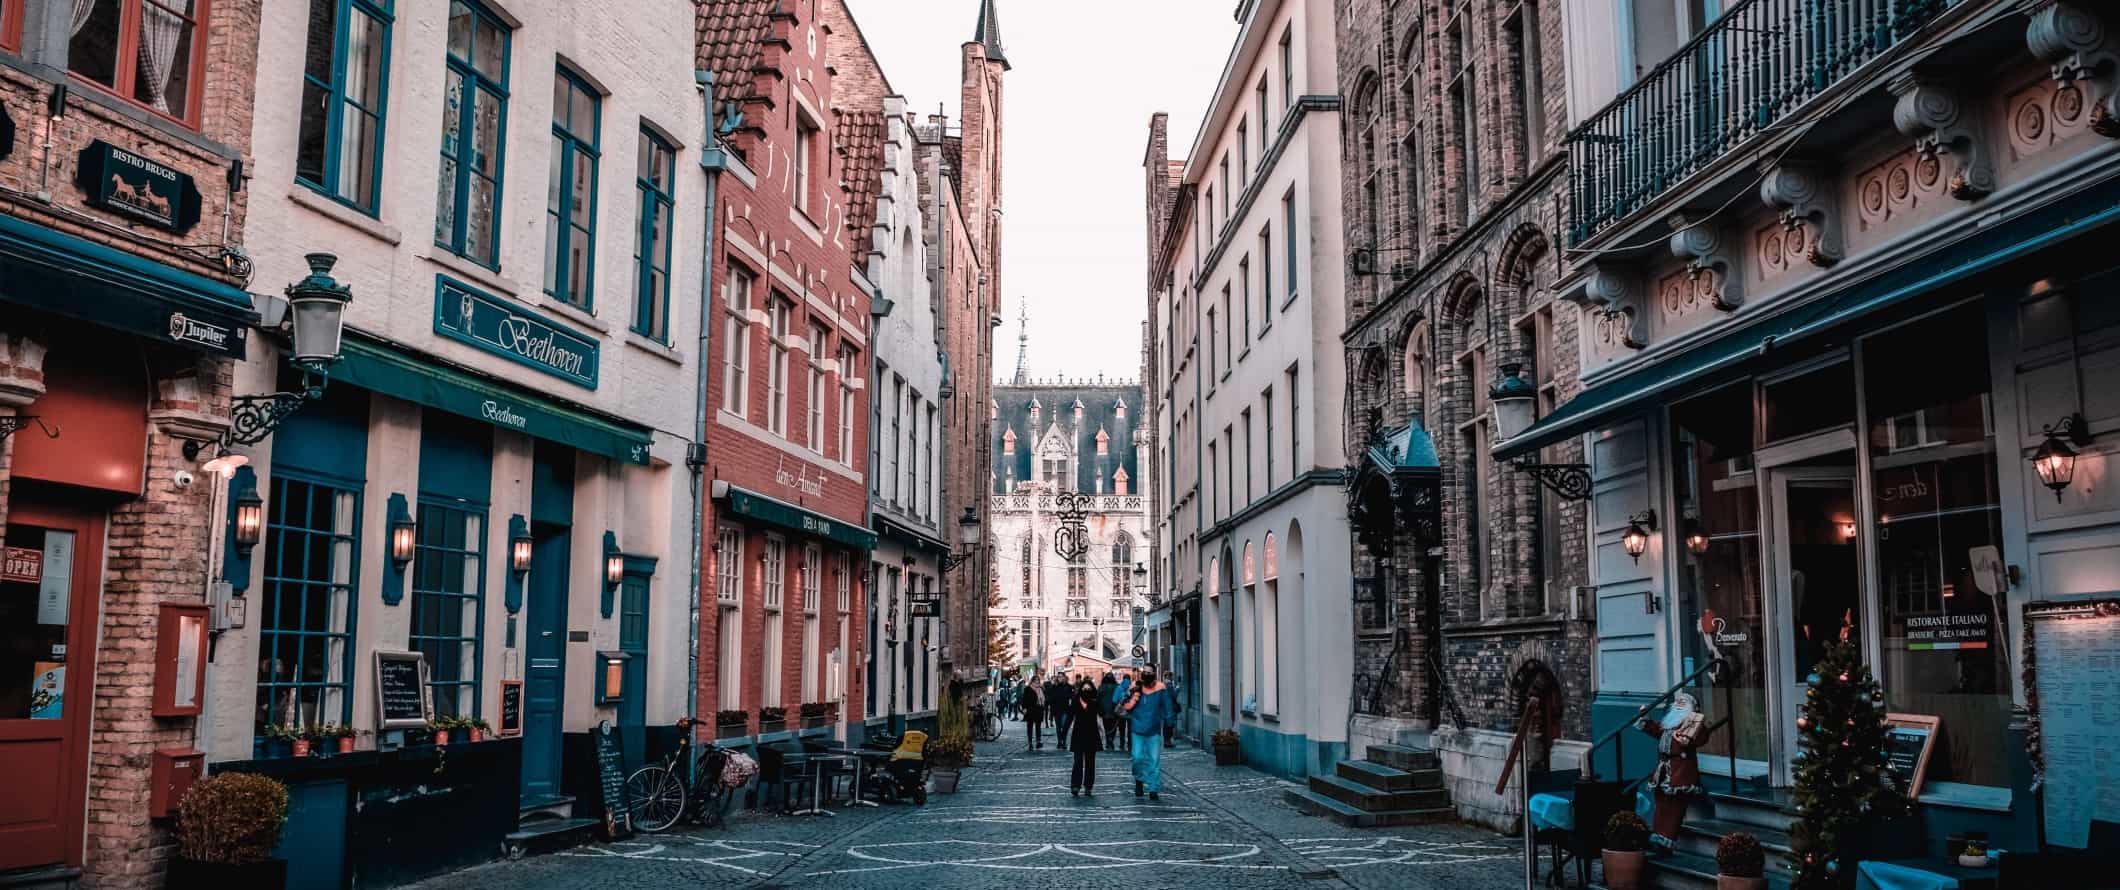 People walking down a pedestrianized cobblestone street in the historic center of Ghent, Belgium